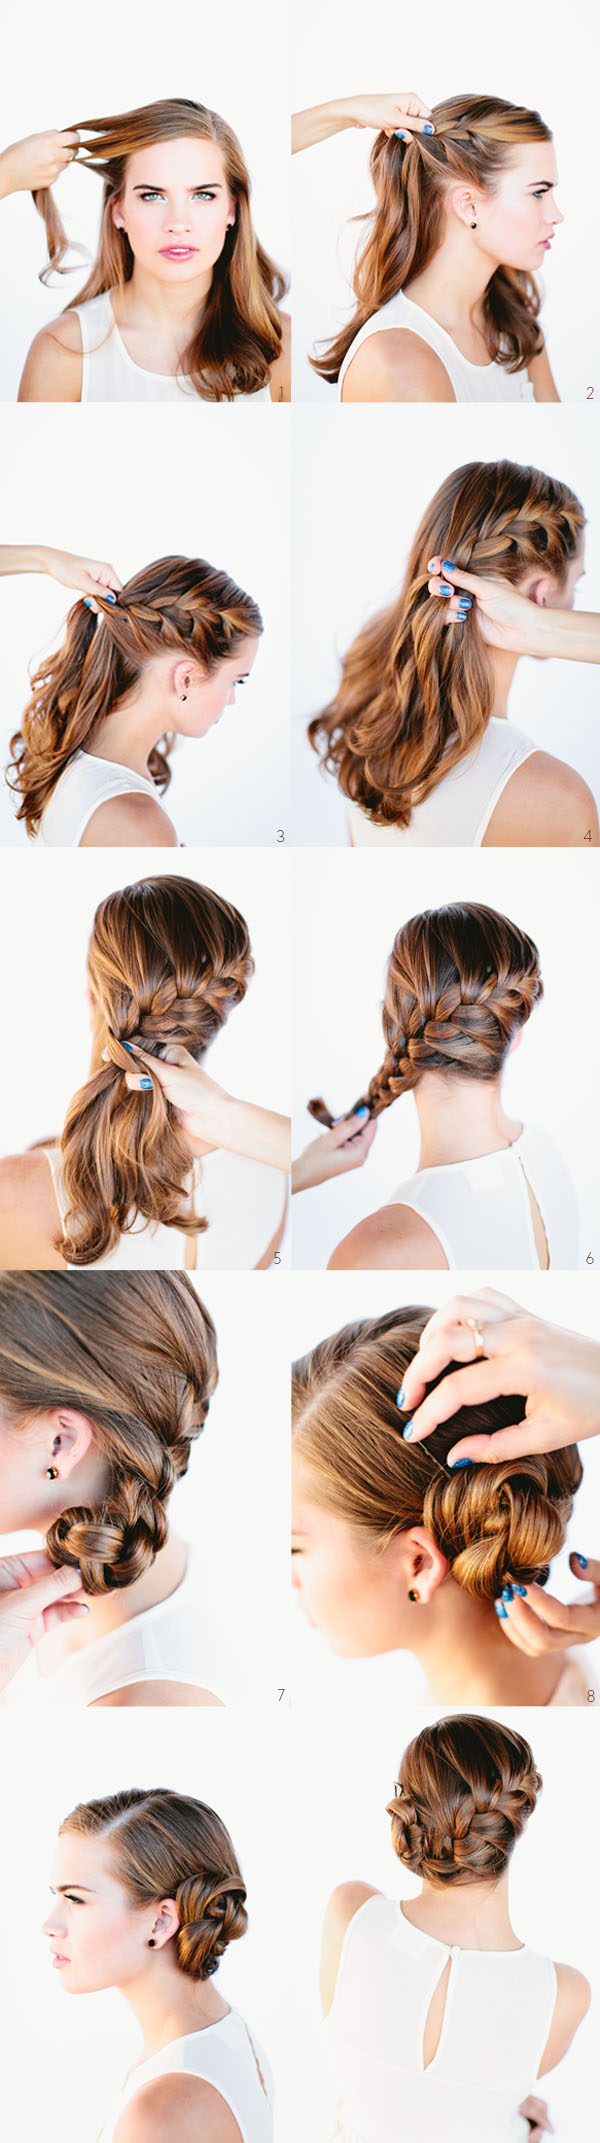 18 Great Hairstyle Ideas and Tutorials for Perfect Holiday Look (2)